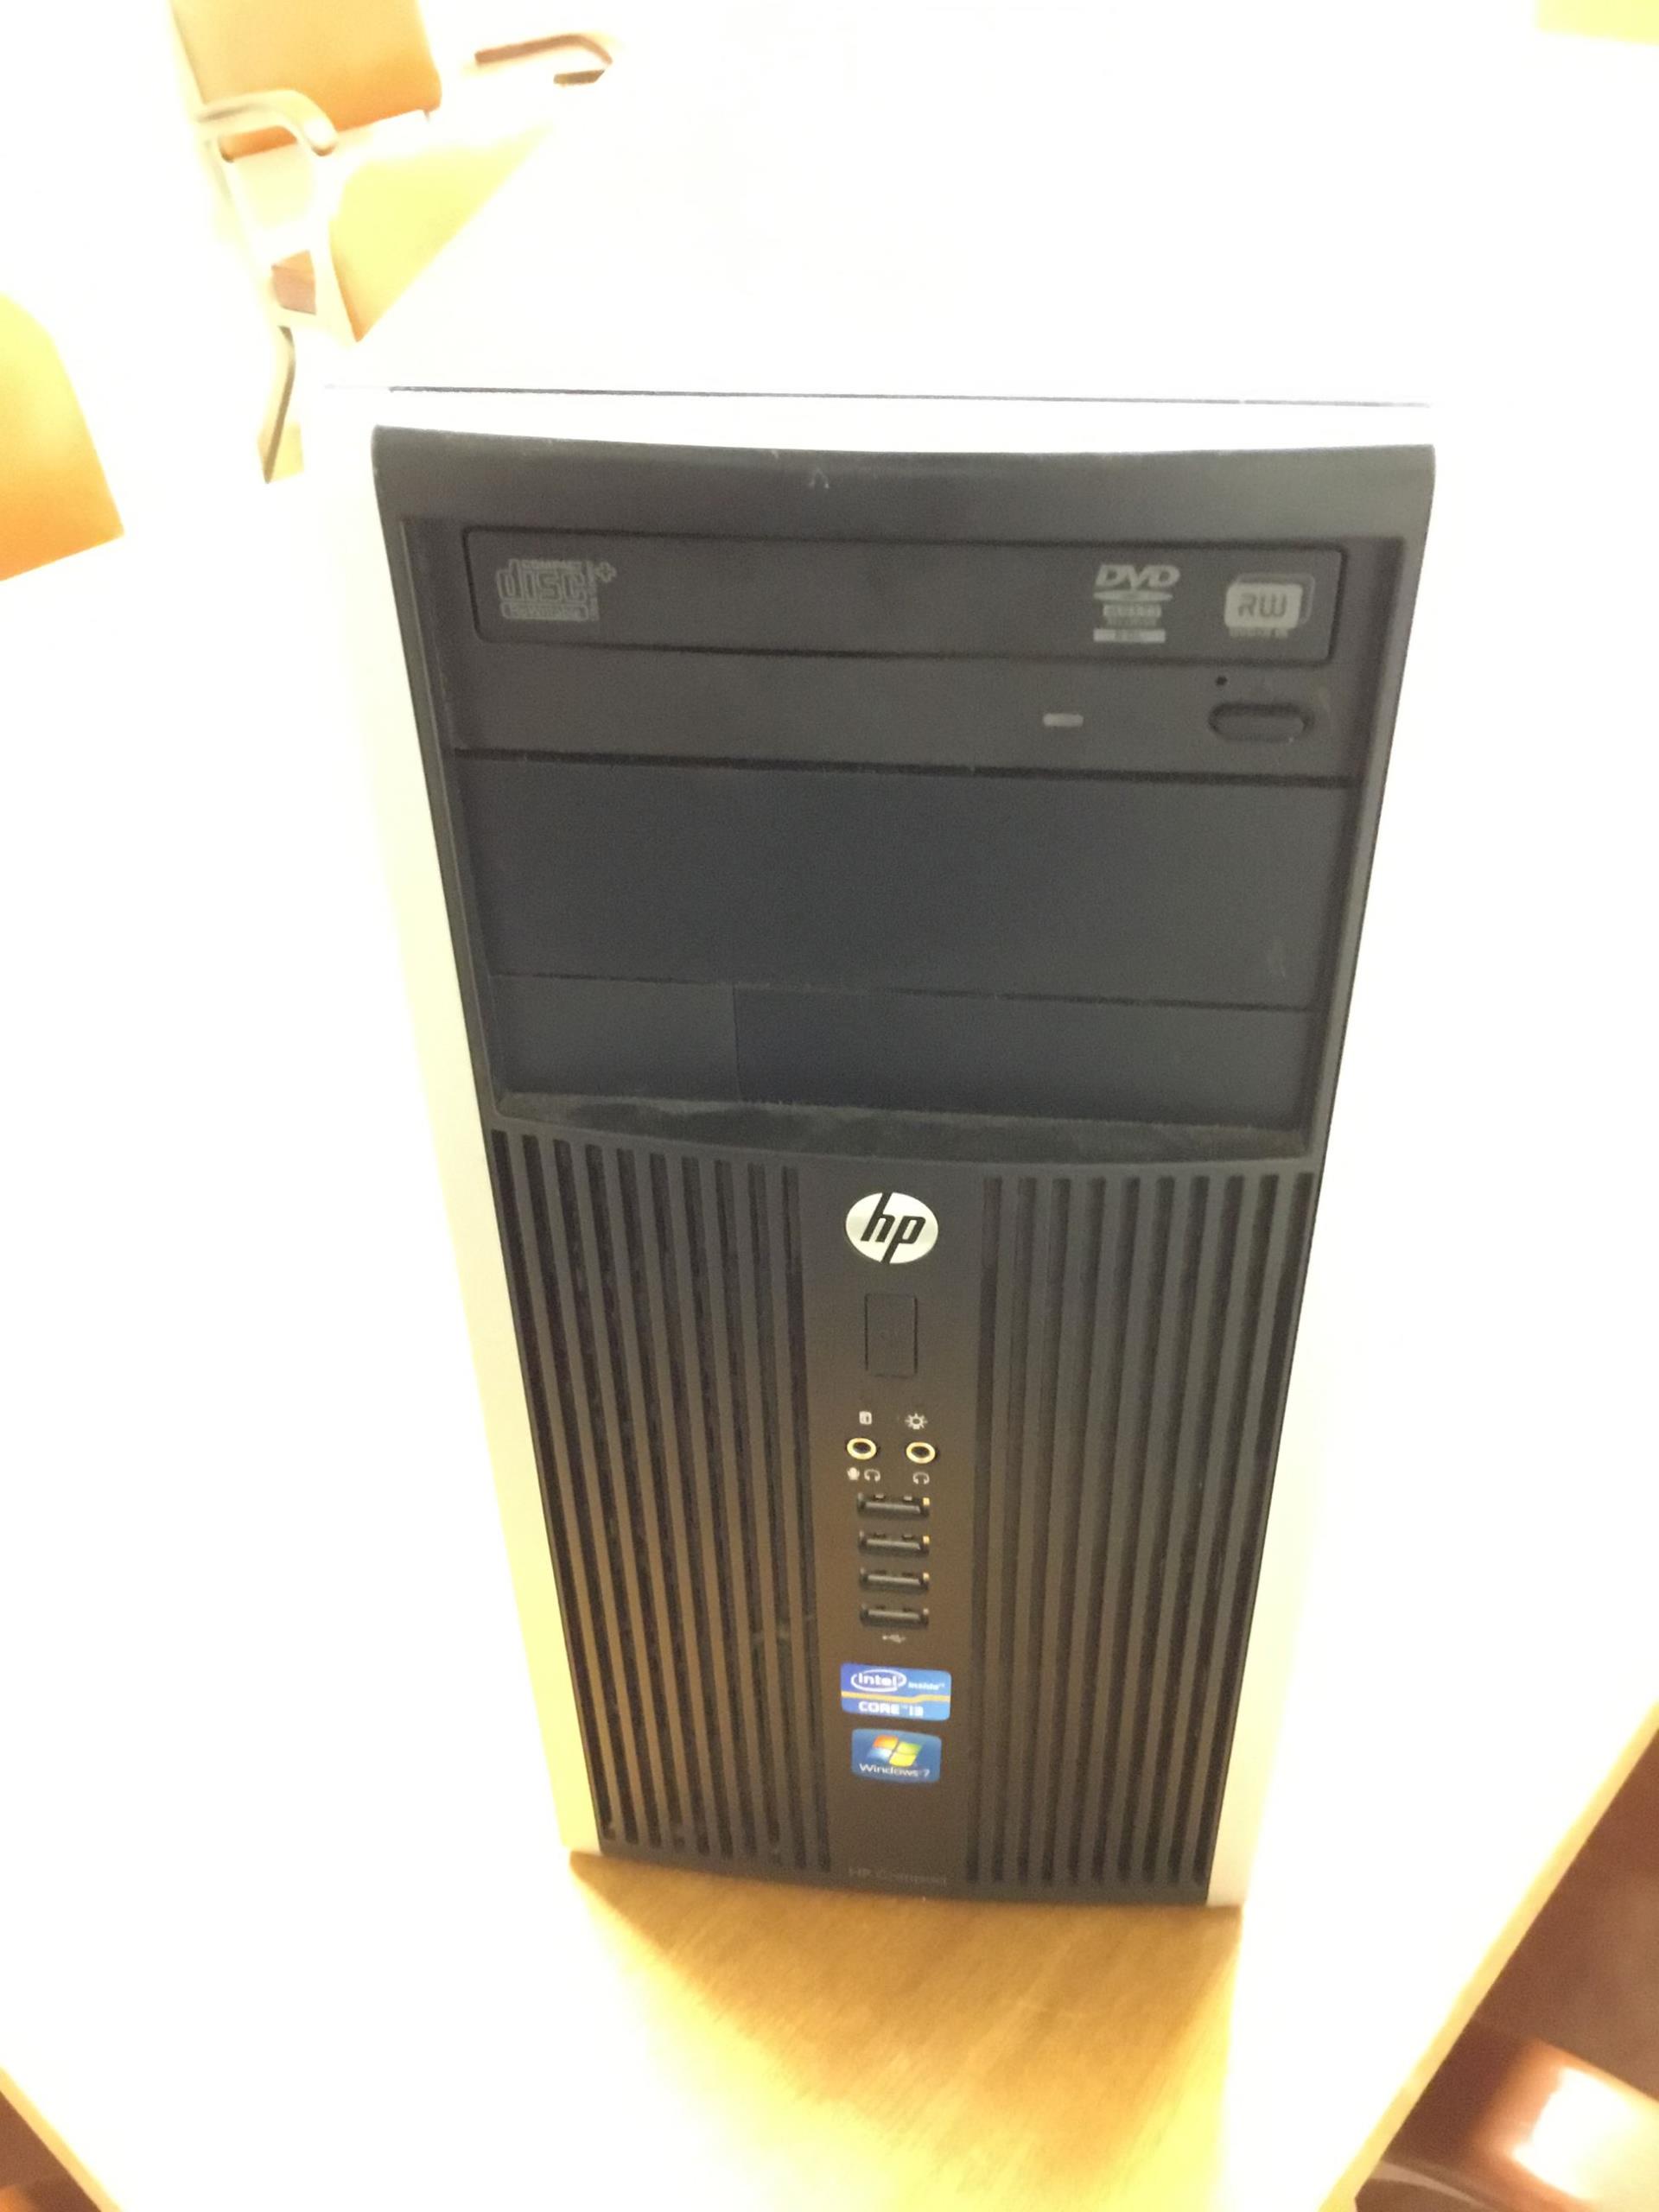 HP 6200 Pro i3 Computer Tower